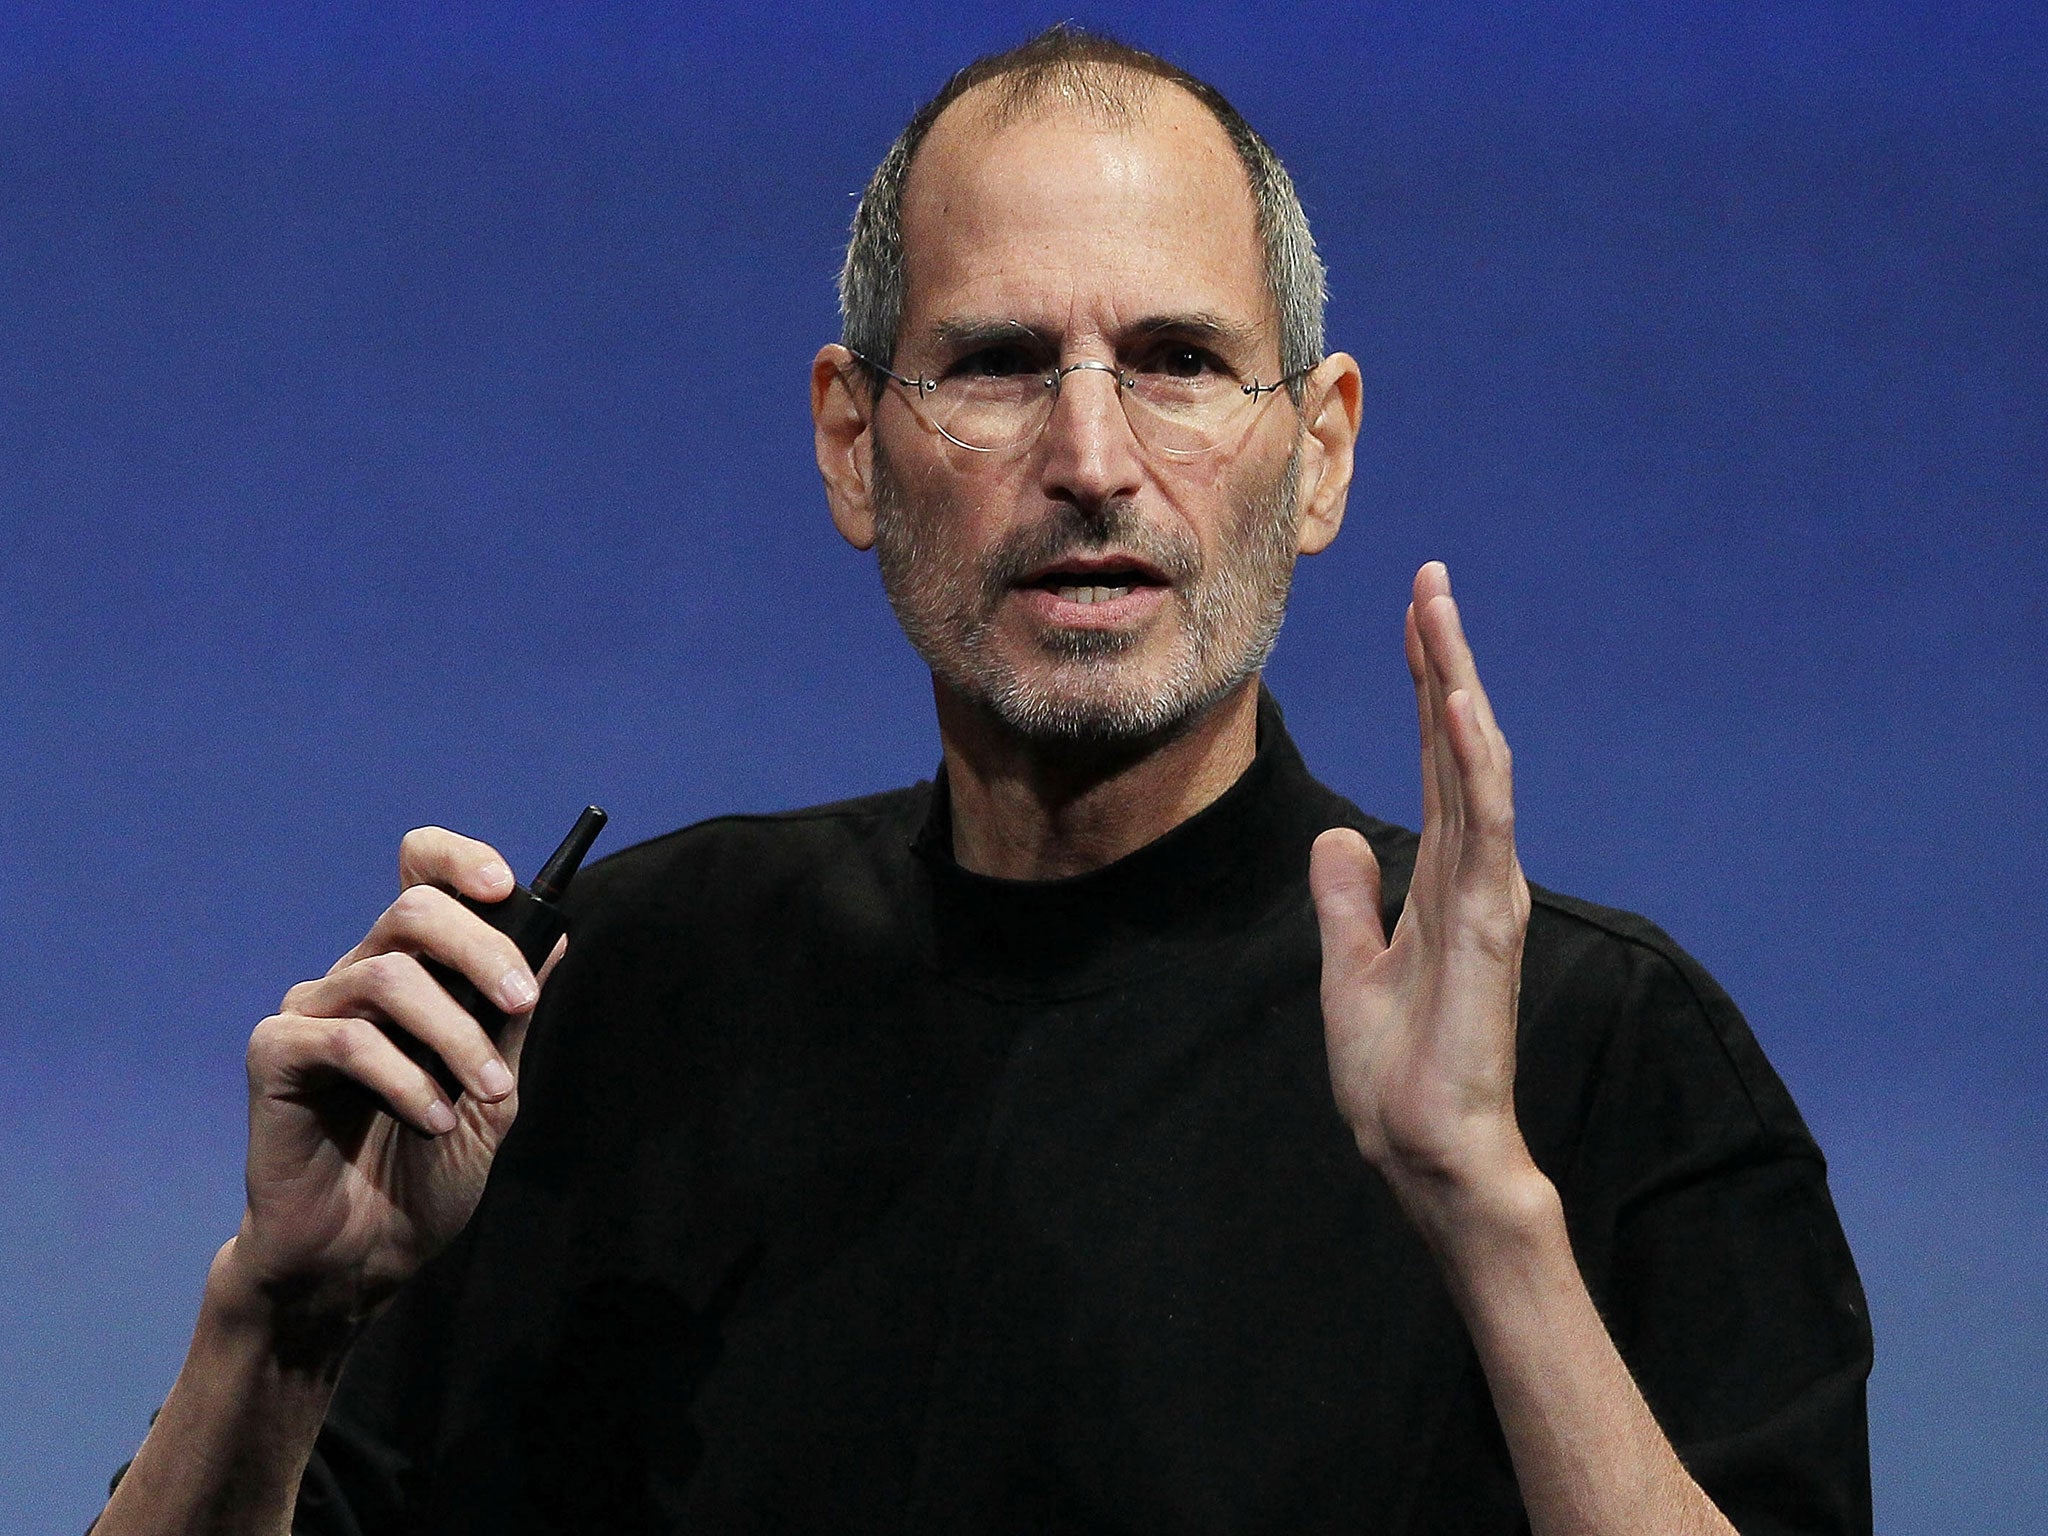 Steve Jobs was worth the money, but the contribution of other chiefs is less easy to quantify